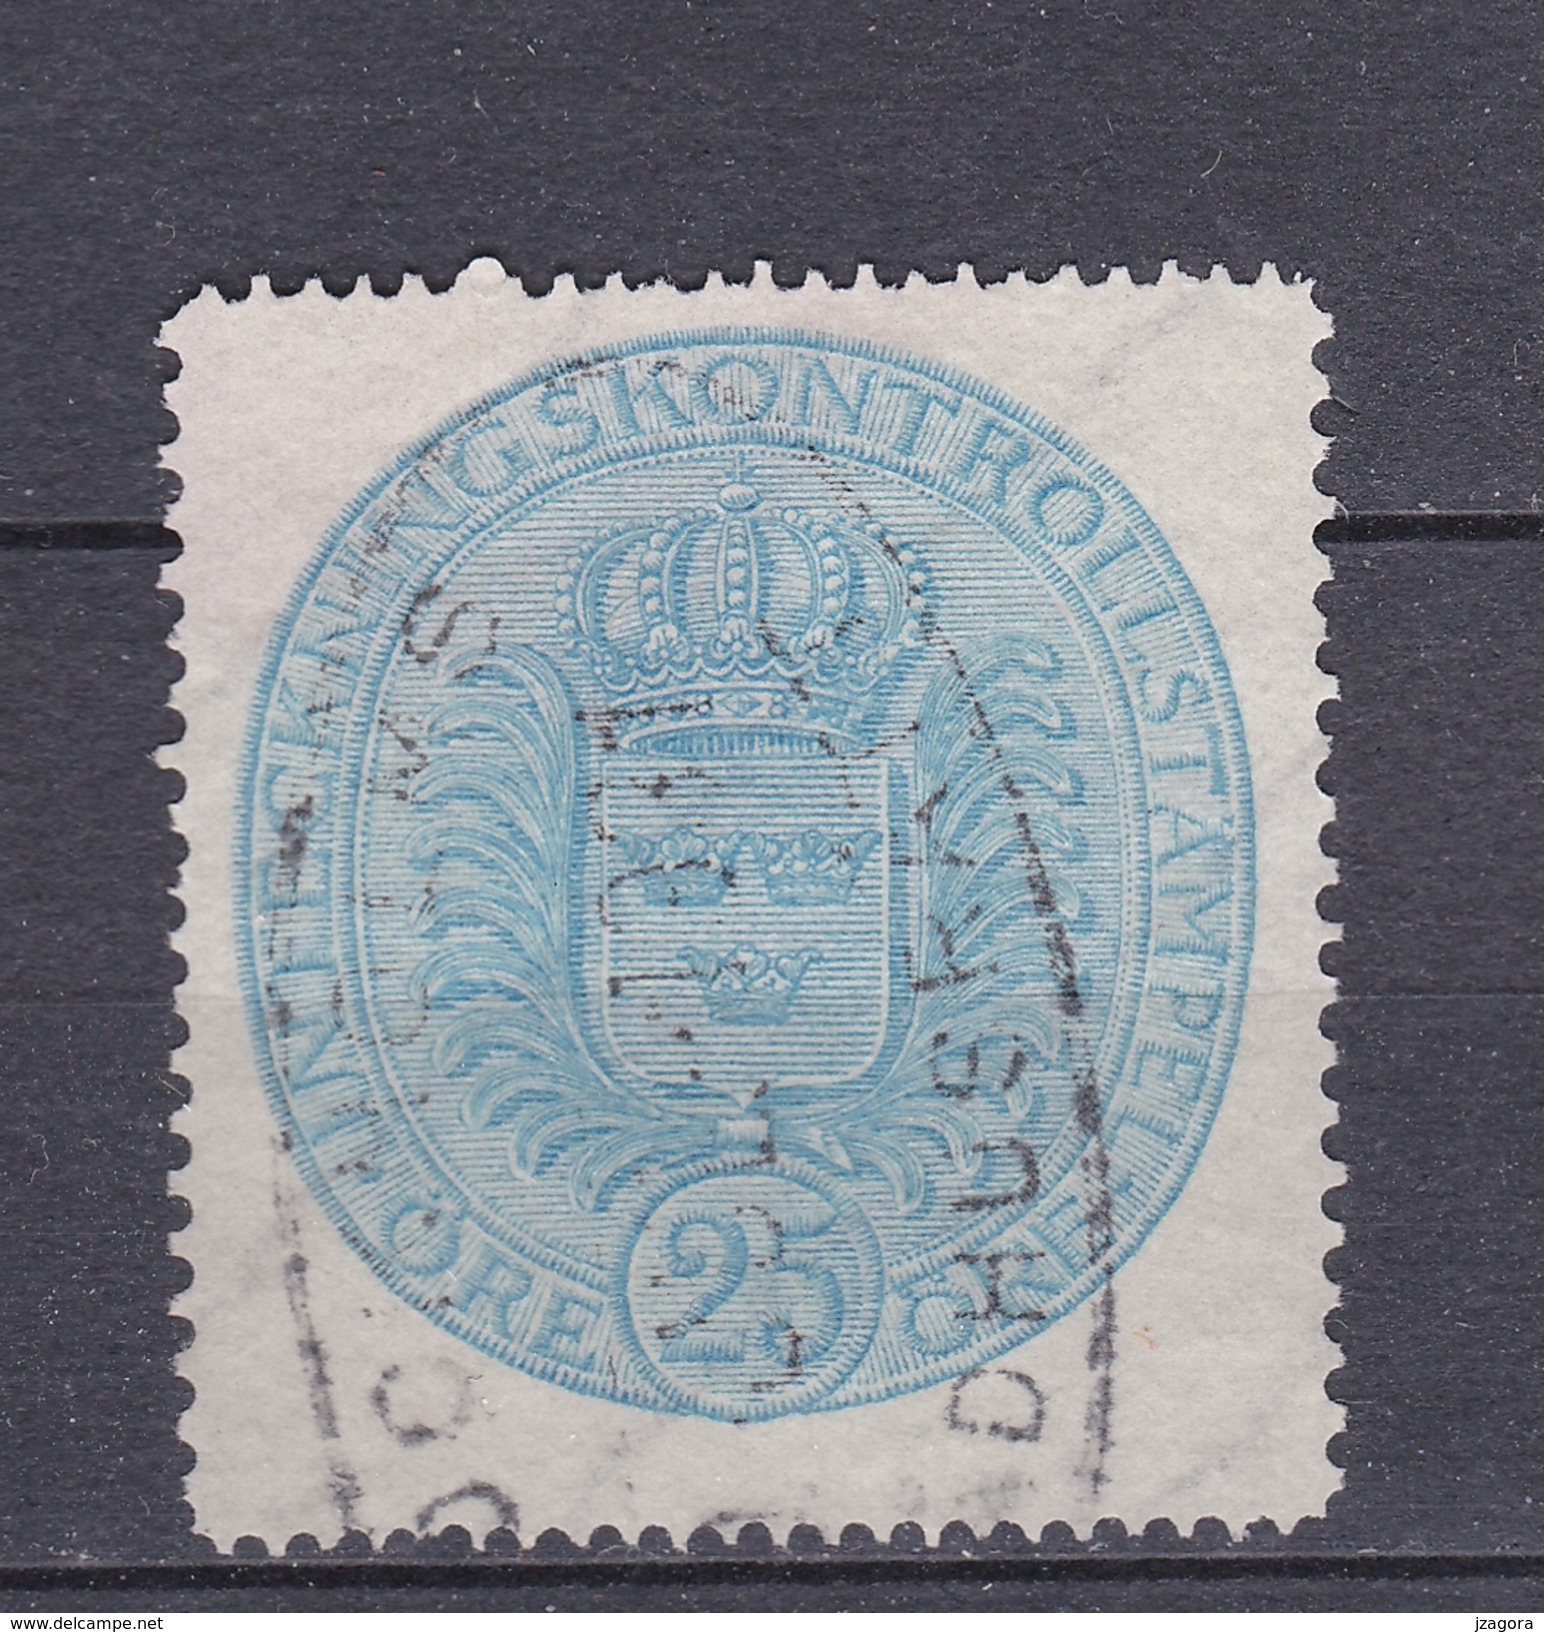 OLD REVENUE STAMP STEUERMARKE TIMBRE FISCAL  MORTGAGE CONTROLL - SWEDEN  -  25 ORE  HYPOTHEKEN HYPOTHÈQUES HIPOTECA - Fiscaux